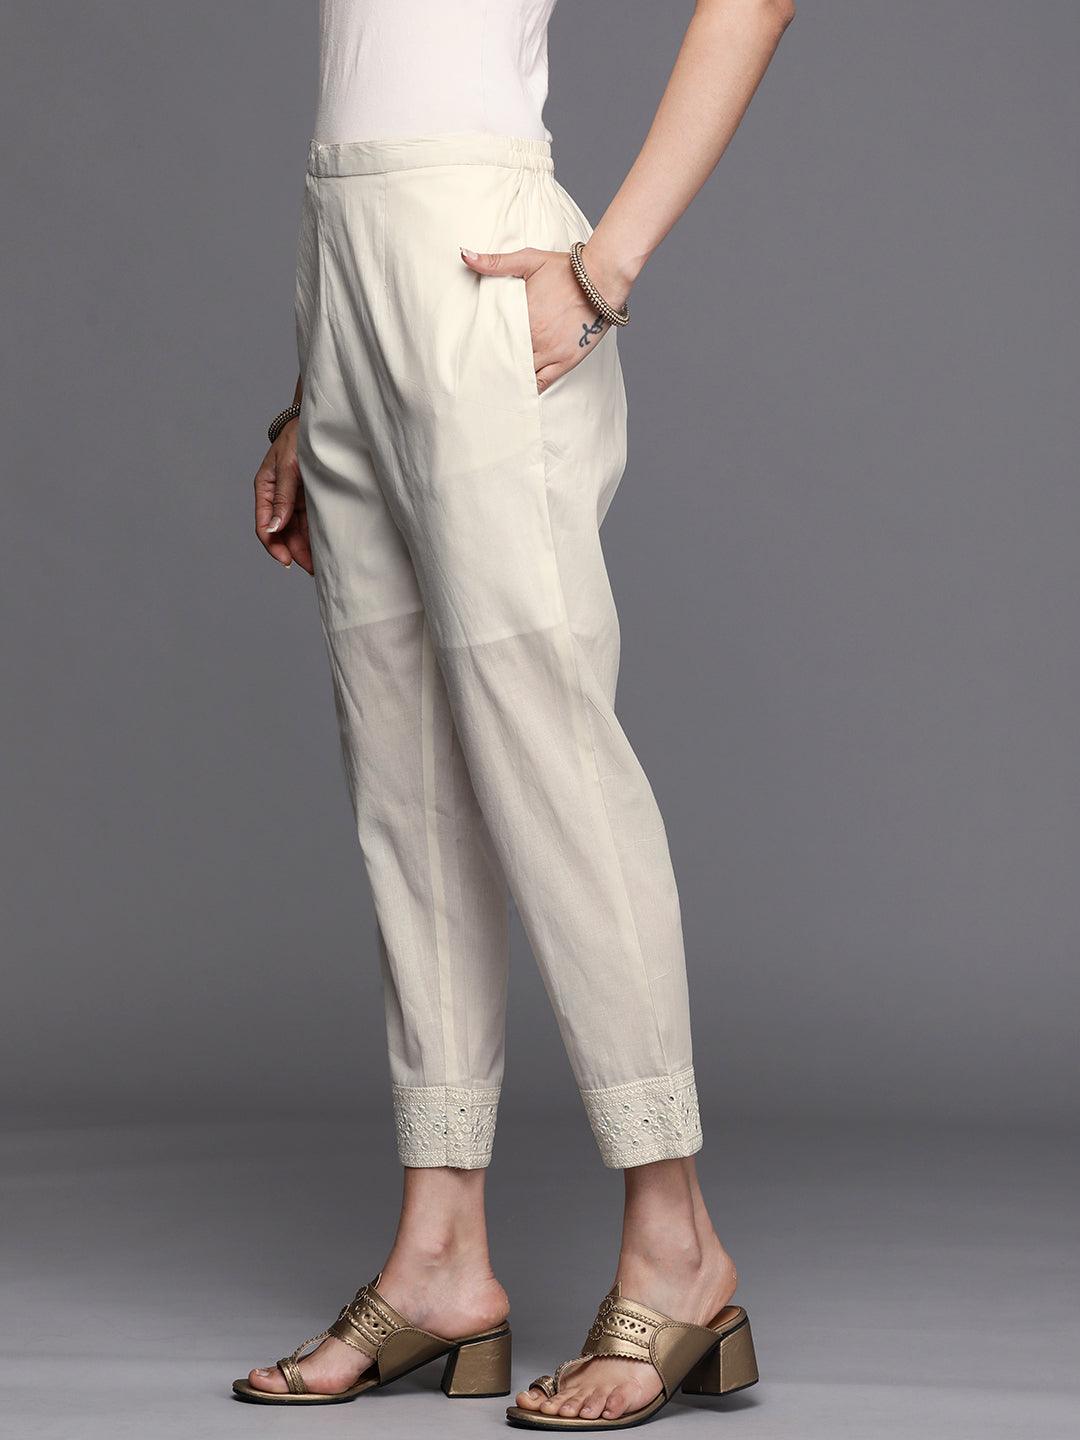 Off White Embroidered Cotton Trousers